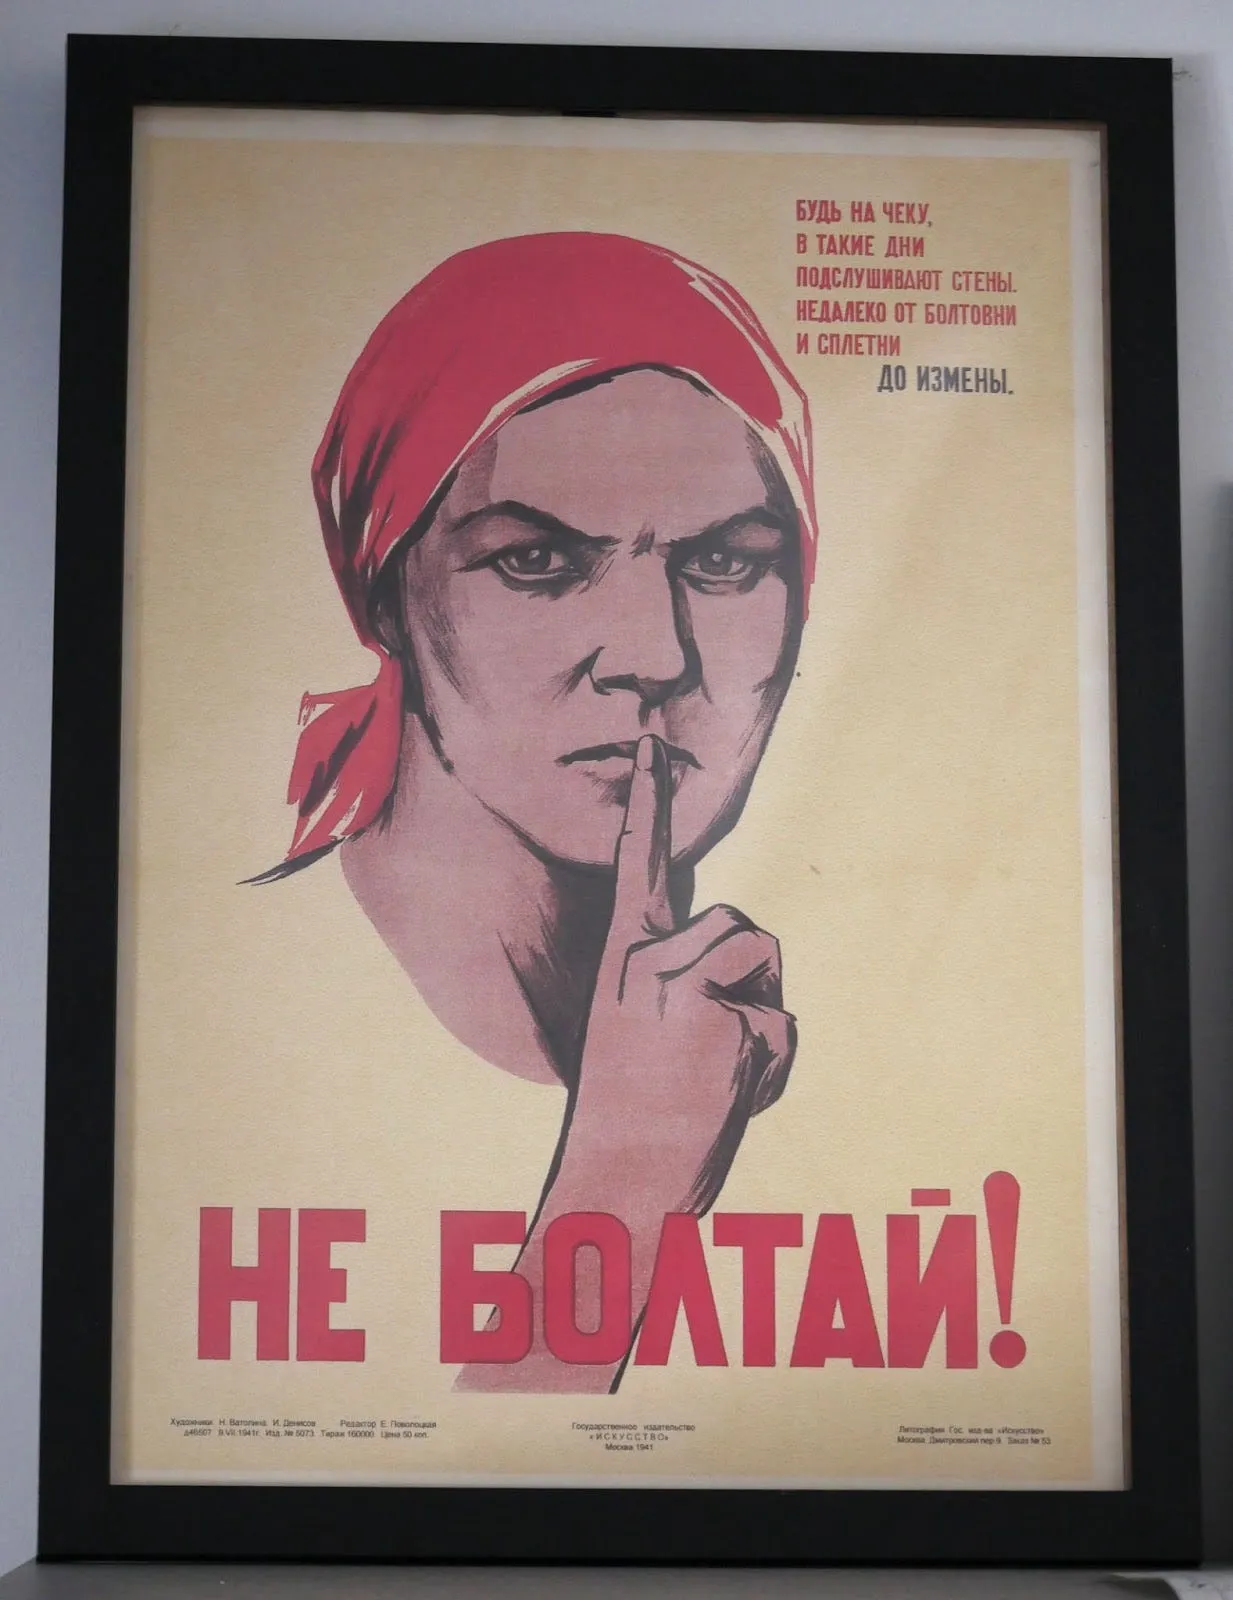 The Soviet poster up on Zone de Securitate’s office wall, says: “Don’t talk! Be attentive these days. The walls are listening. Gossiping is not far from betrayal.”